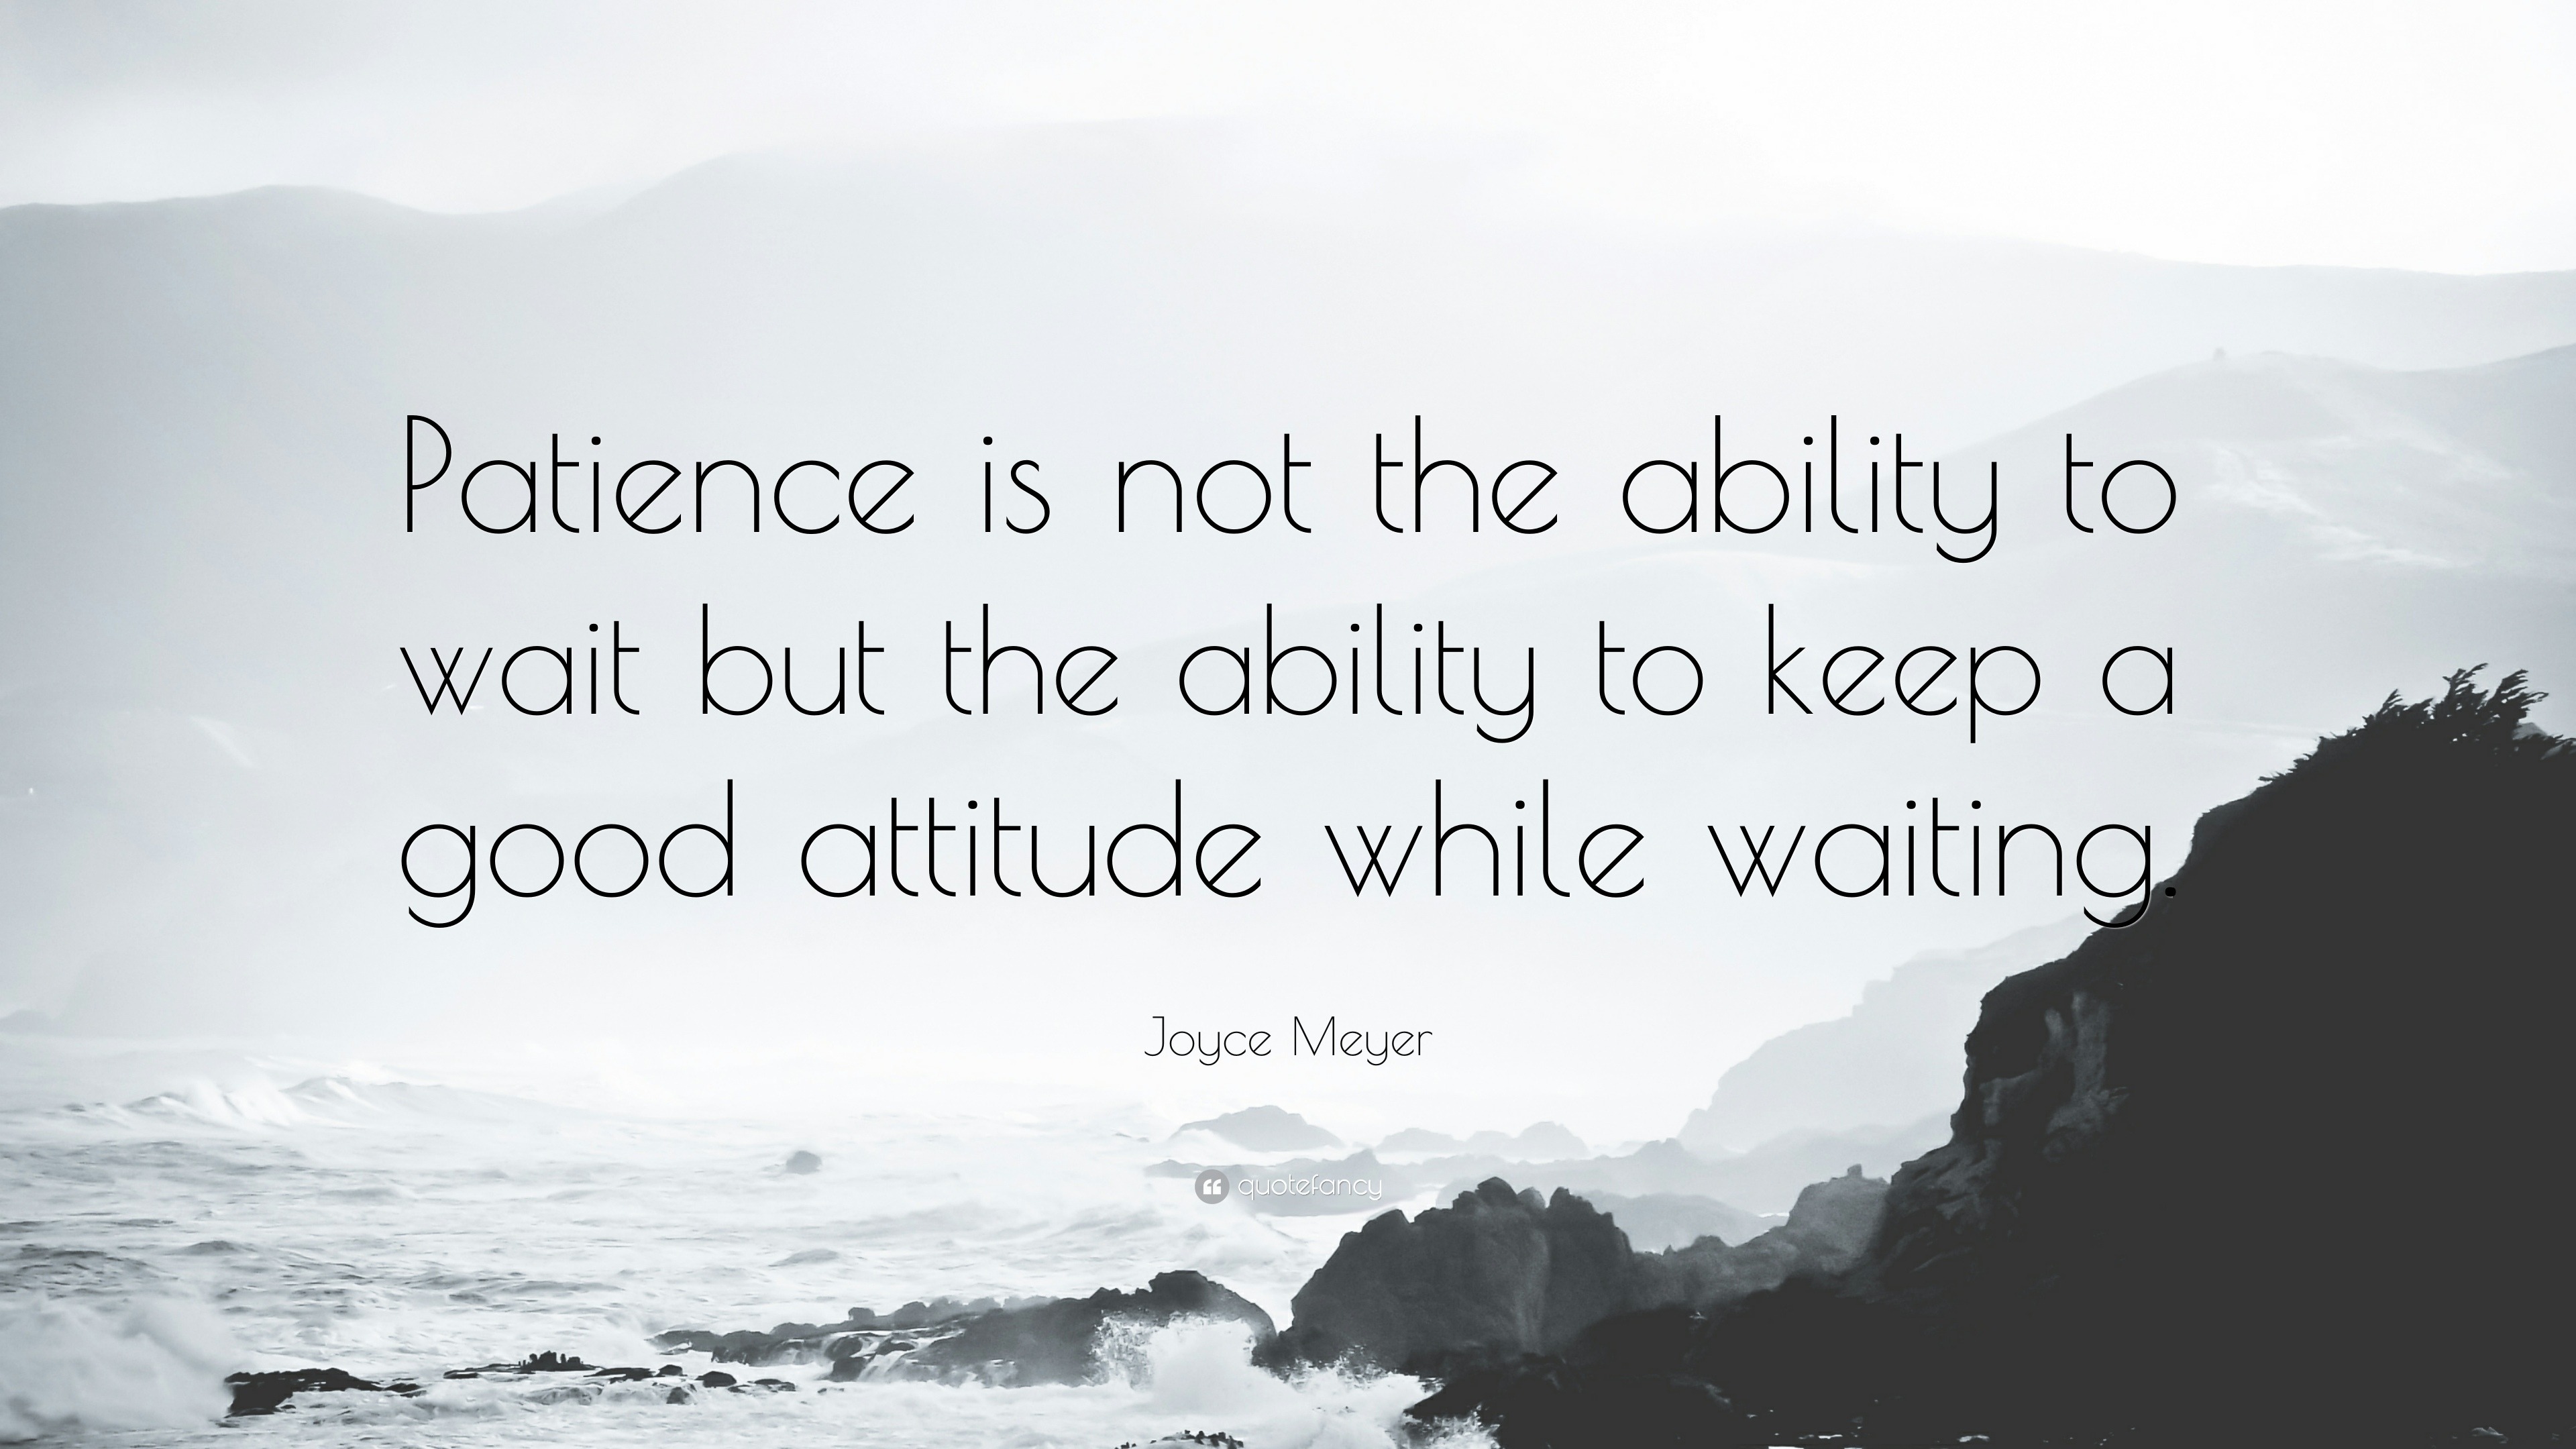 Joyce Meyer Quote: “Patience is not the ability to wait but the ability to  keep a